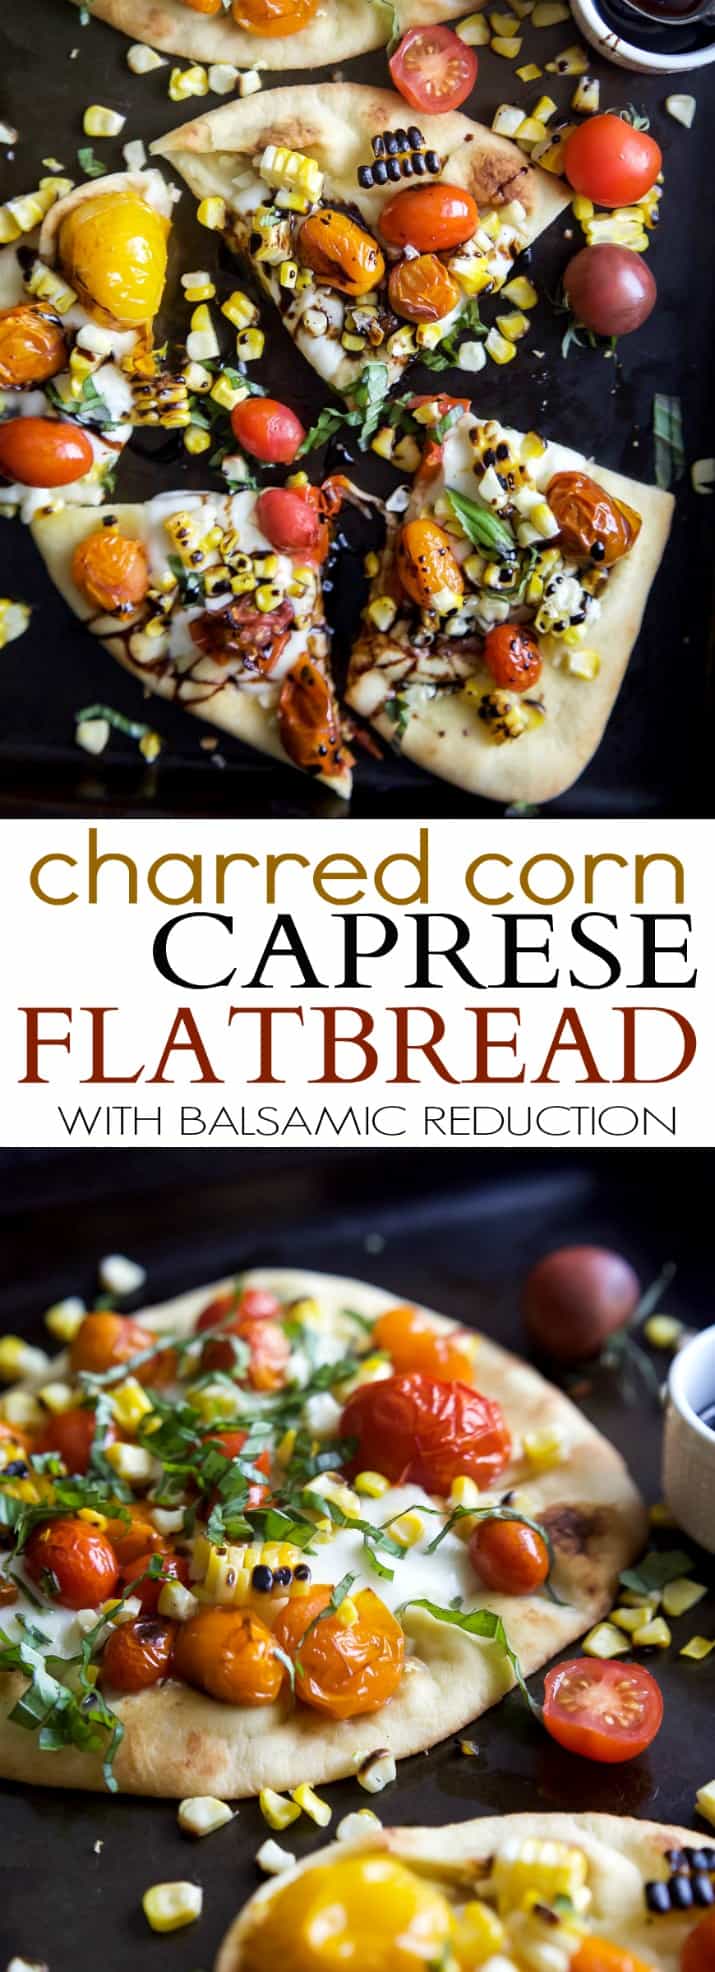 Charred Corn Caprese Flatbread topped with sweet Balsamic Reduction